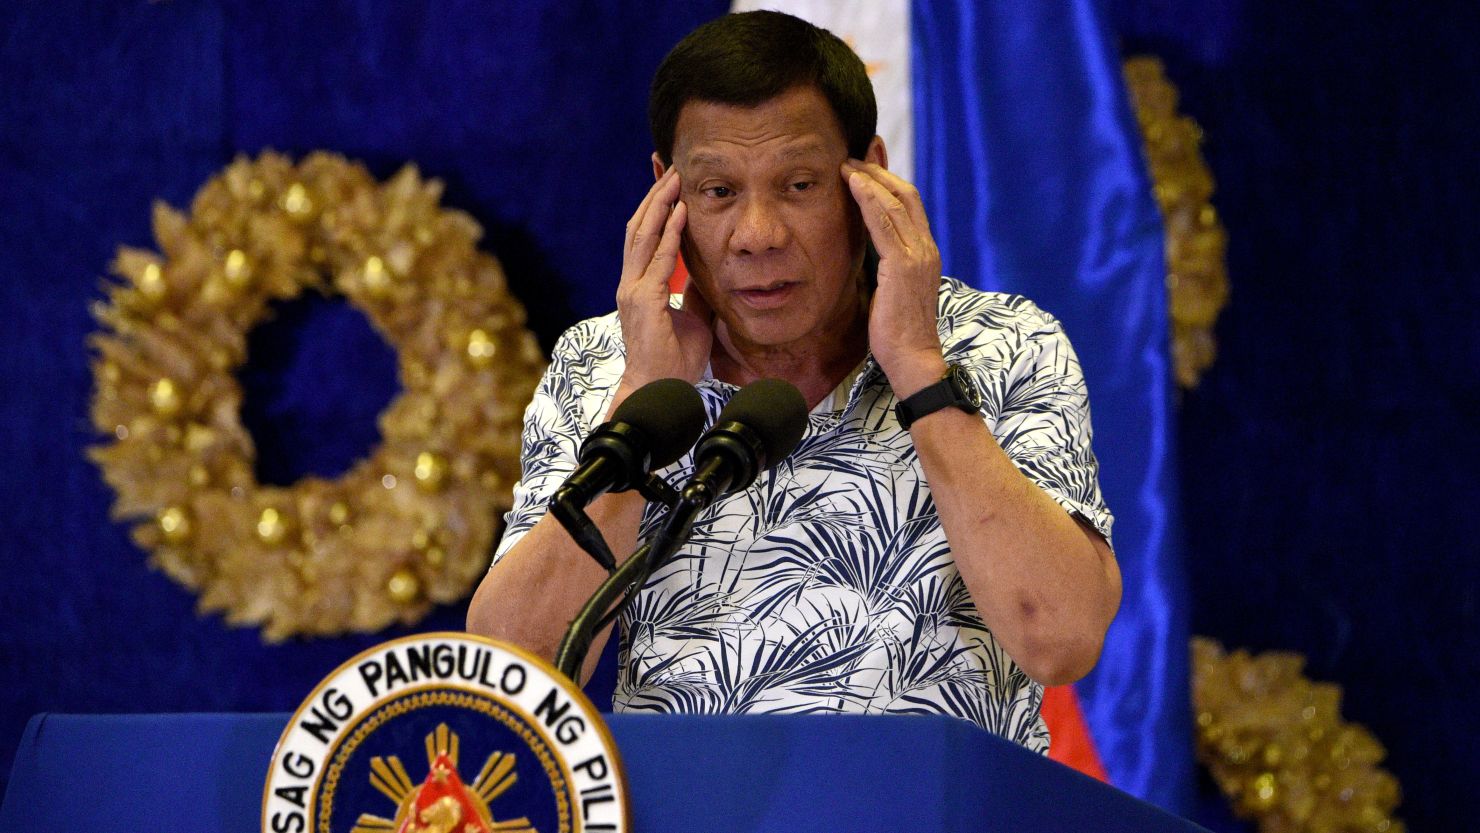 Philippines President Rodrigo Duterte gestures during a press conference at Malacanang Palace in Manila on November 19, 2019. 